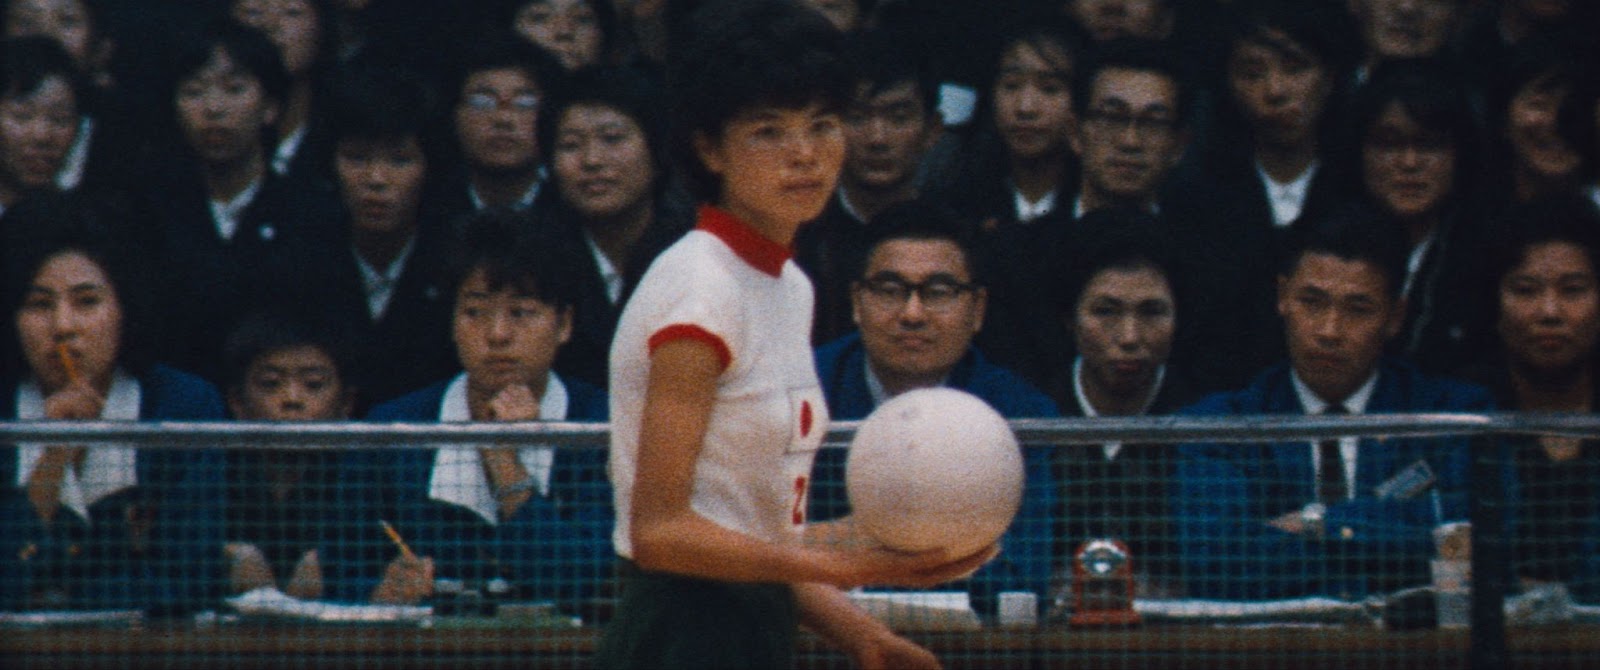 A screen still from The Witches of the Orient, featuring a scene of archival footage from one of the games played by the volleyball team.